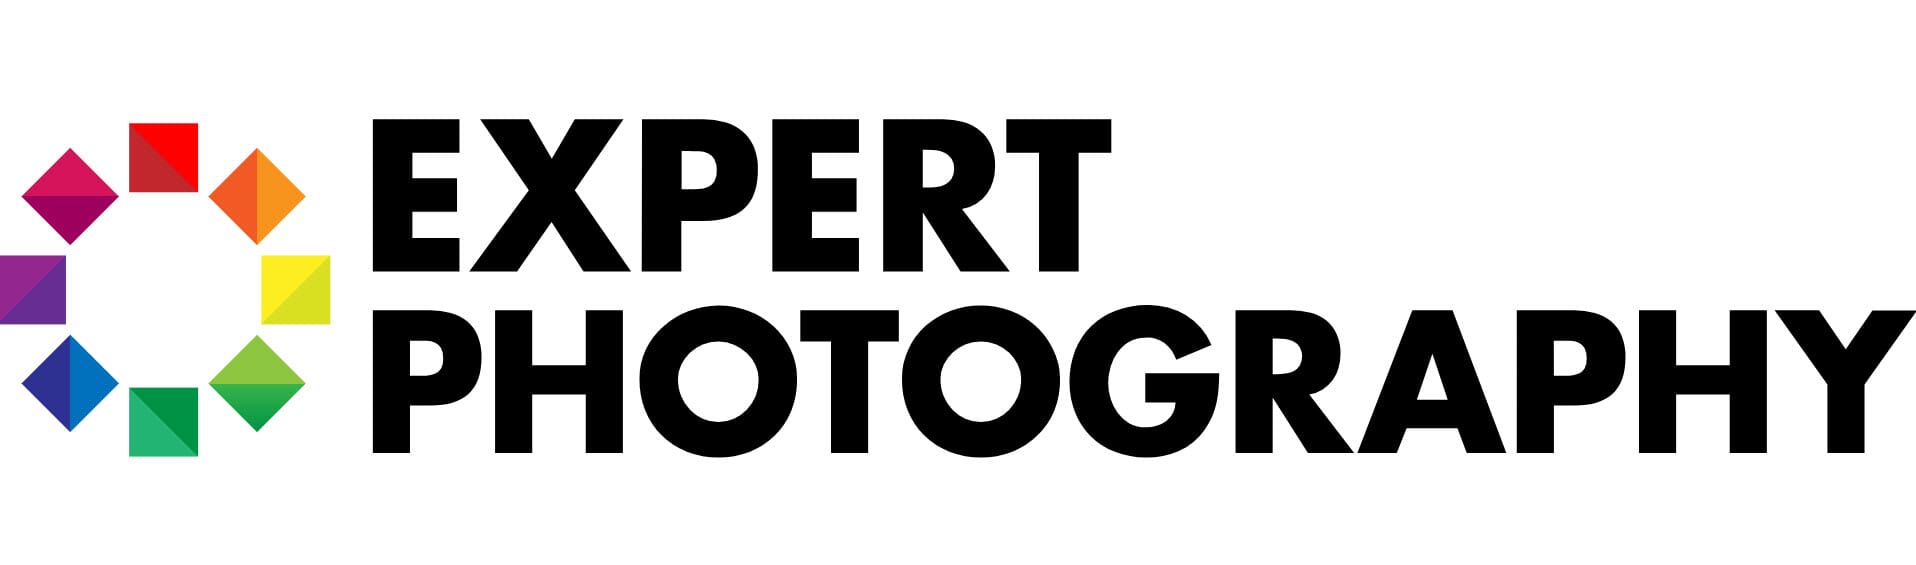 ExpertPhotography Courses and eBooks